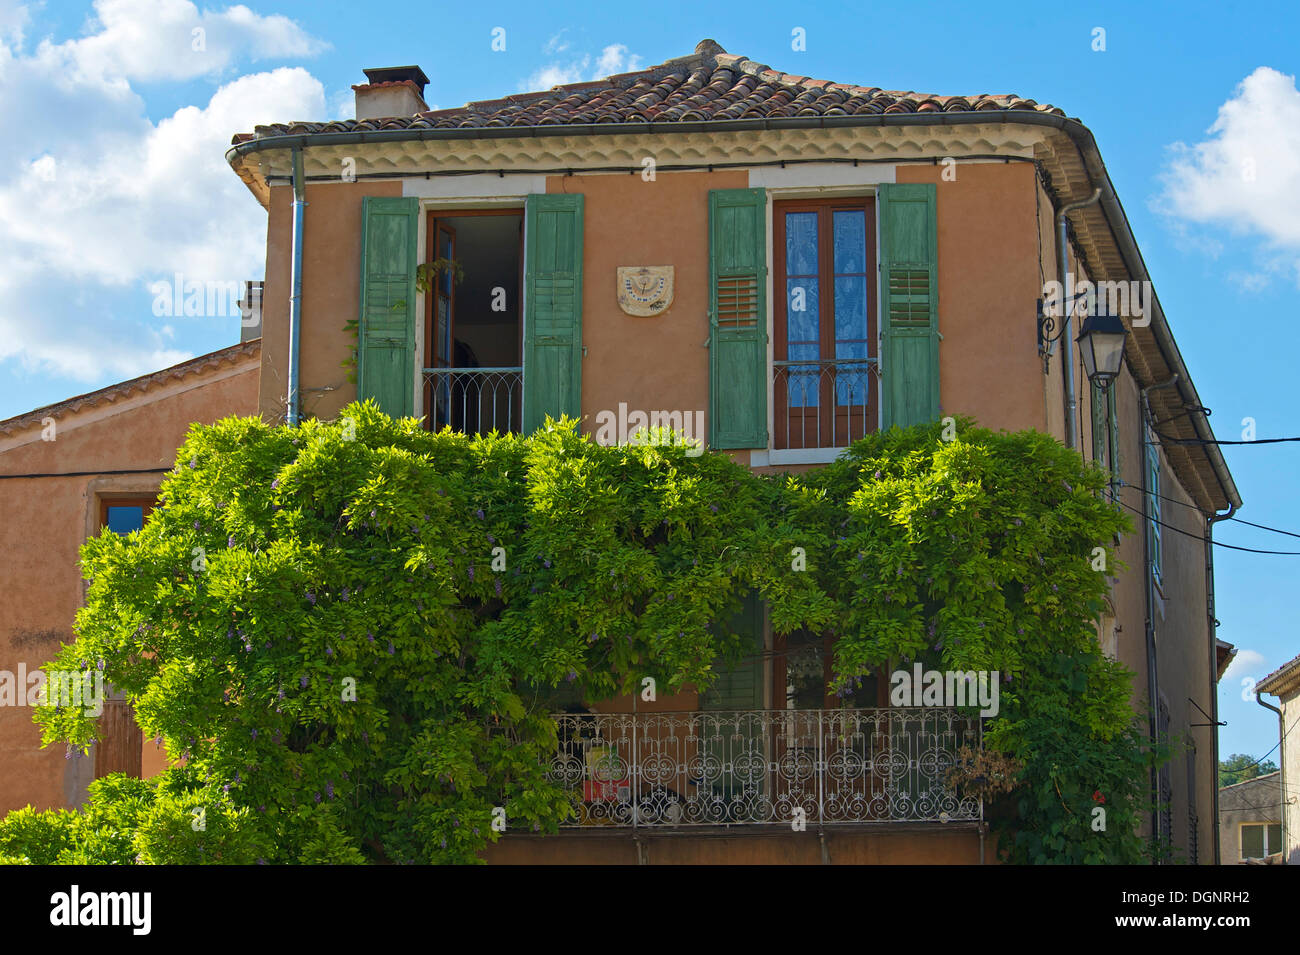 Old house covered in wisteria or wysteria, Riez, Provence, Region Provence-Alpes-Côte d’Azur, France Stock Photo